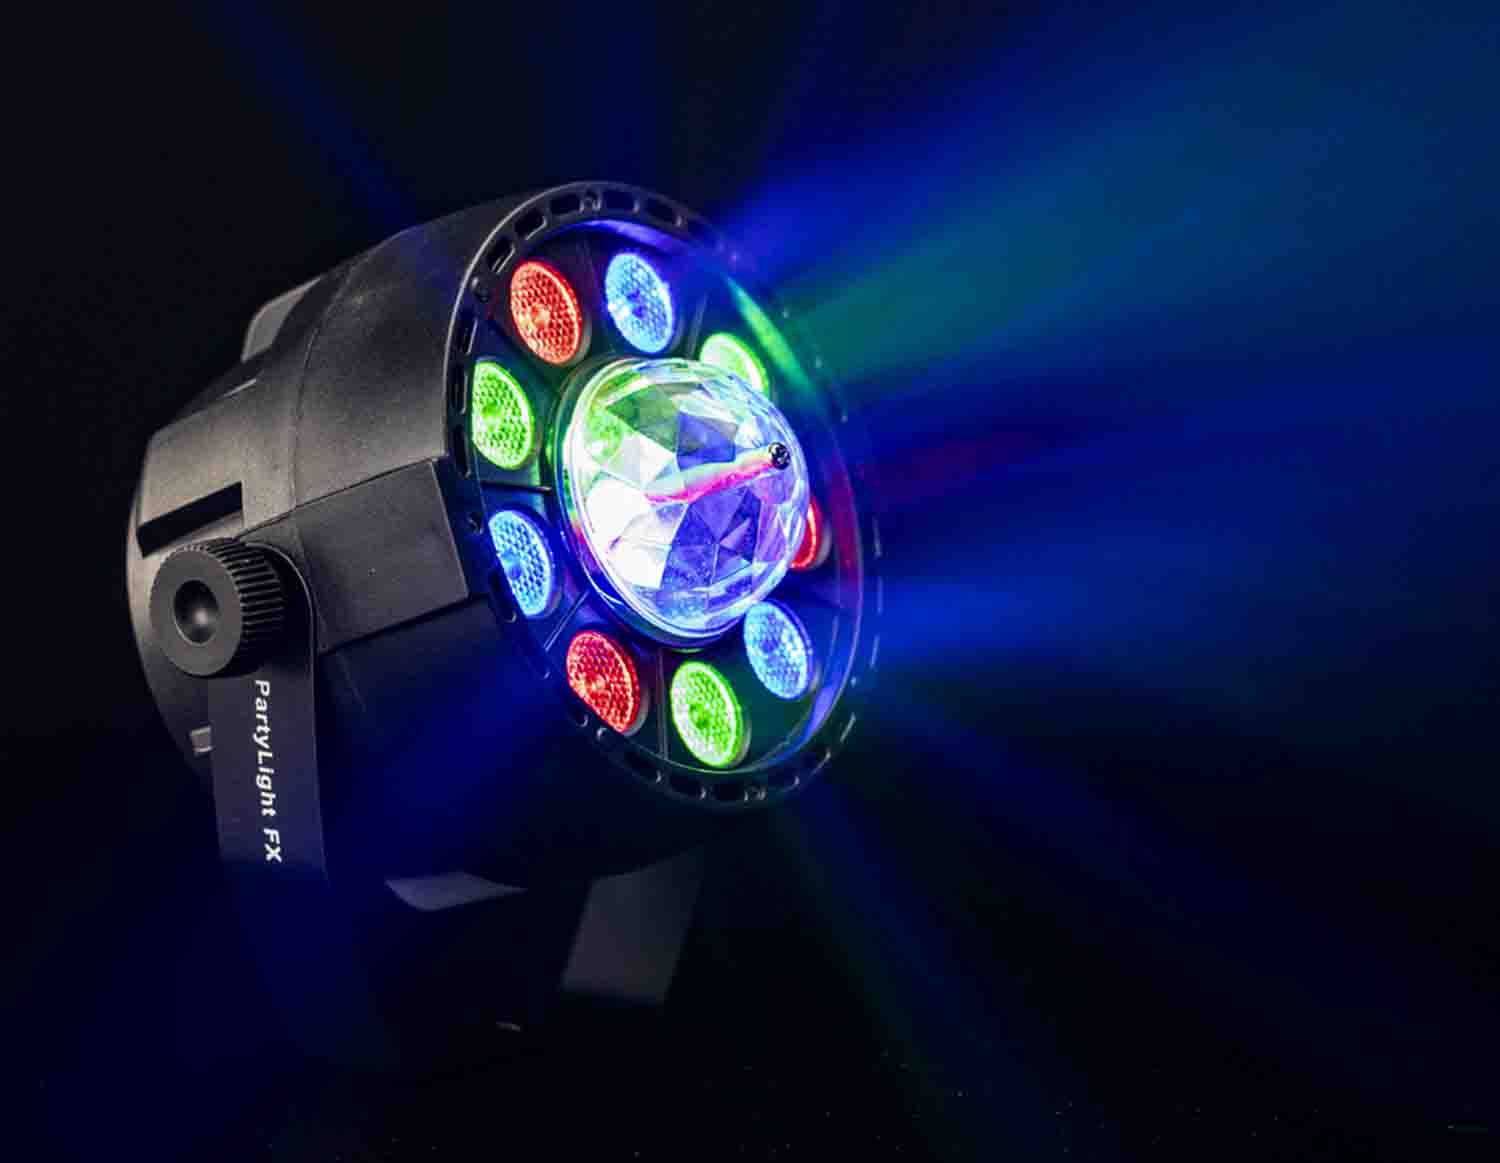 B-Stock: Colorkey CKU-1080 Party Light FX Compact LED Wash Light with Motorized RGB Party Bulb Effect - Hollywood DJ